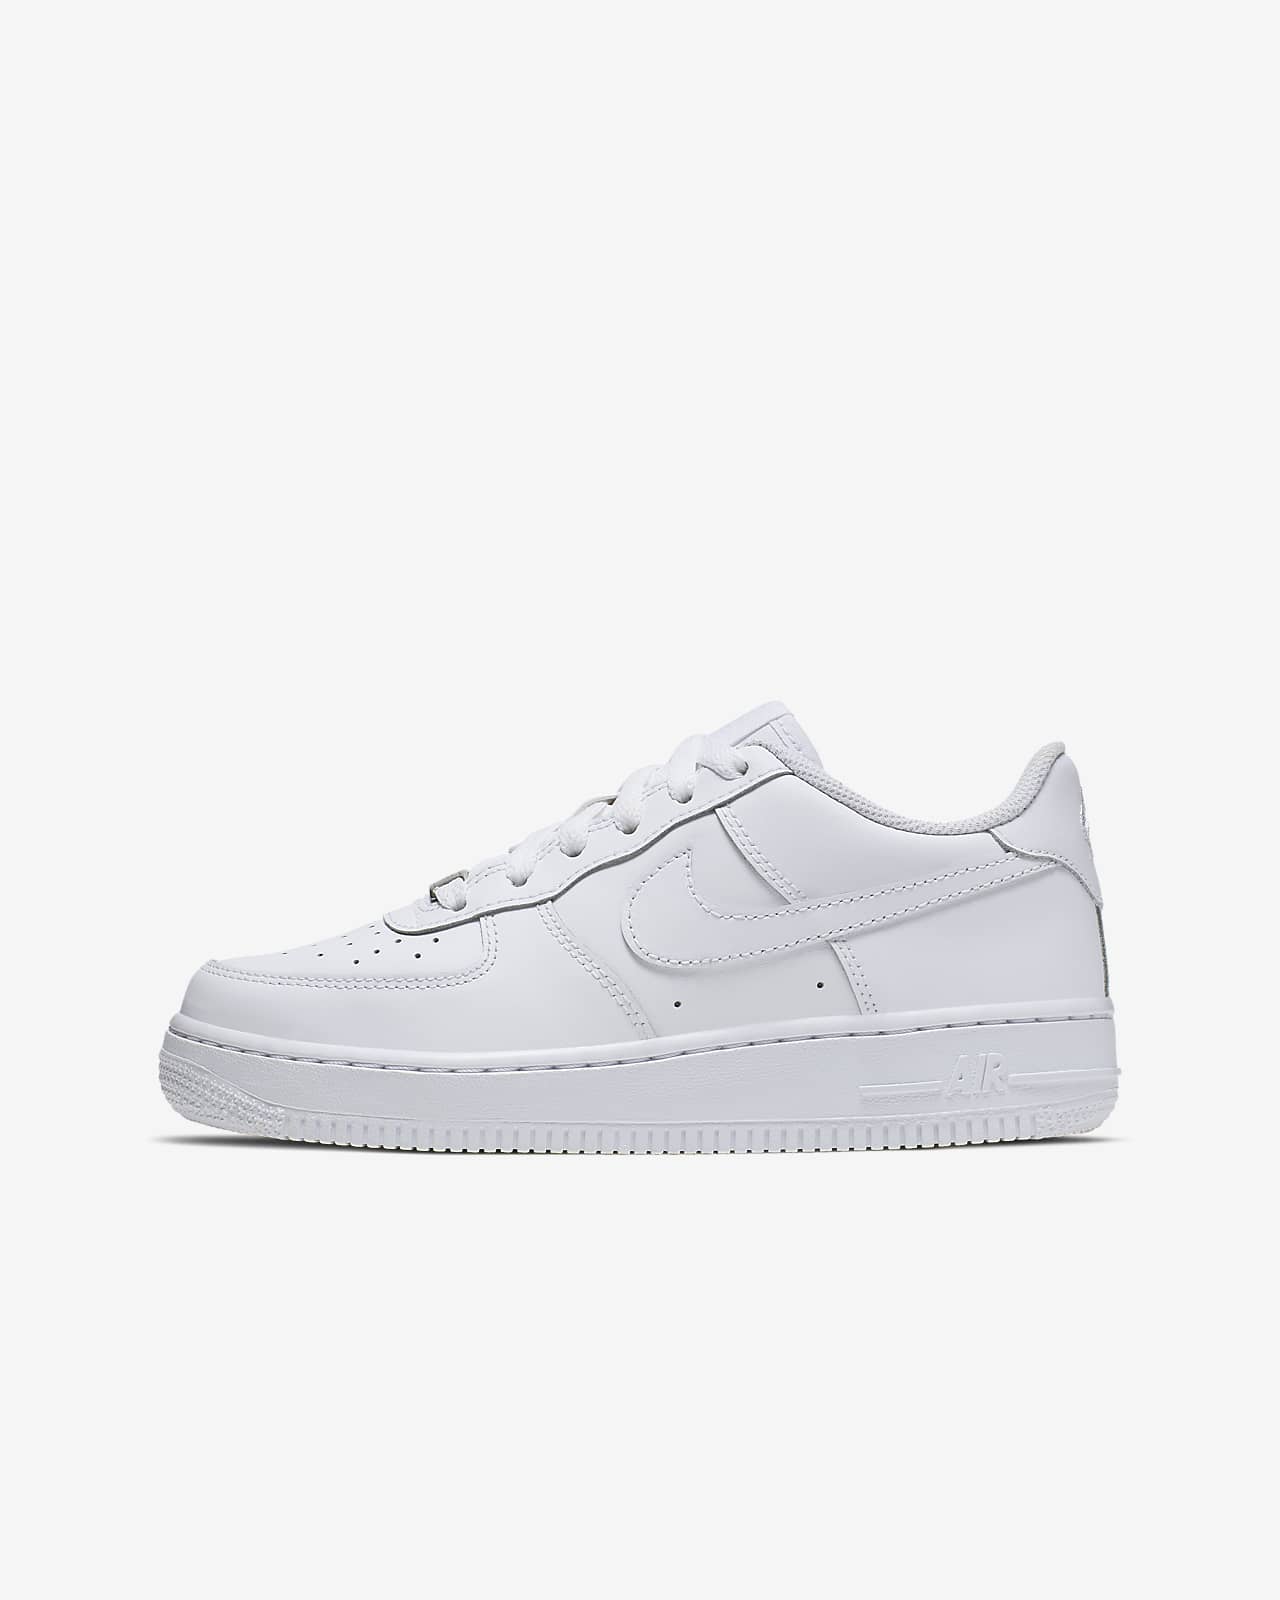 all white nike air force 1s